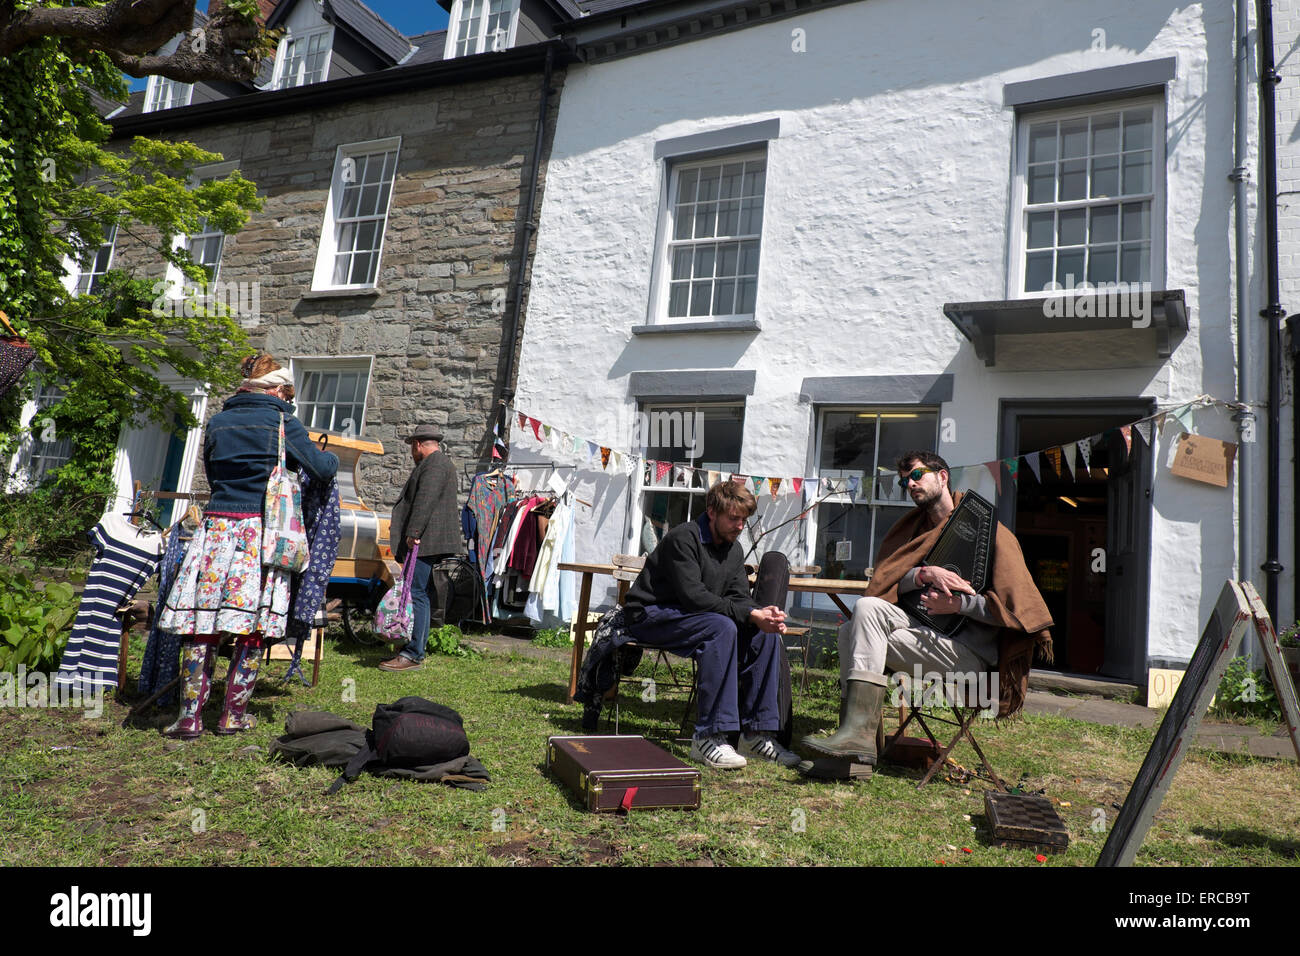 Hay On Wye Wales a pop up shop selling clothes during the Hay Festival  season May 2015 Stock Photo - Alamy